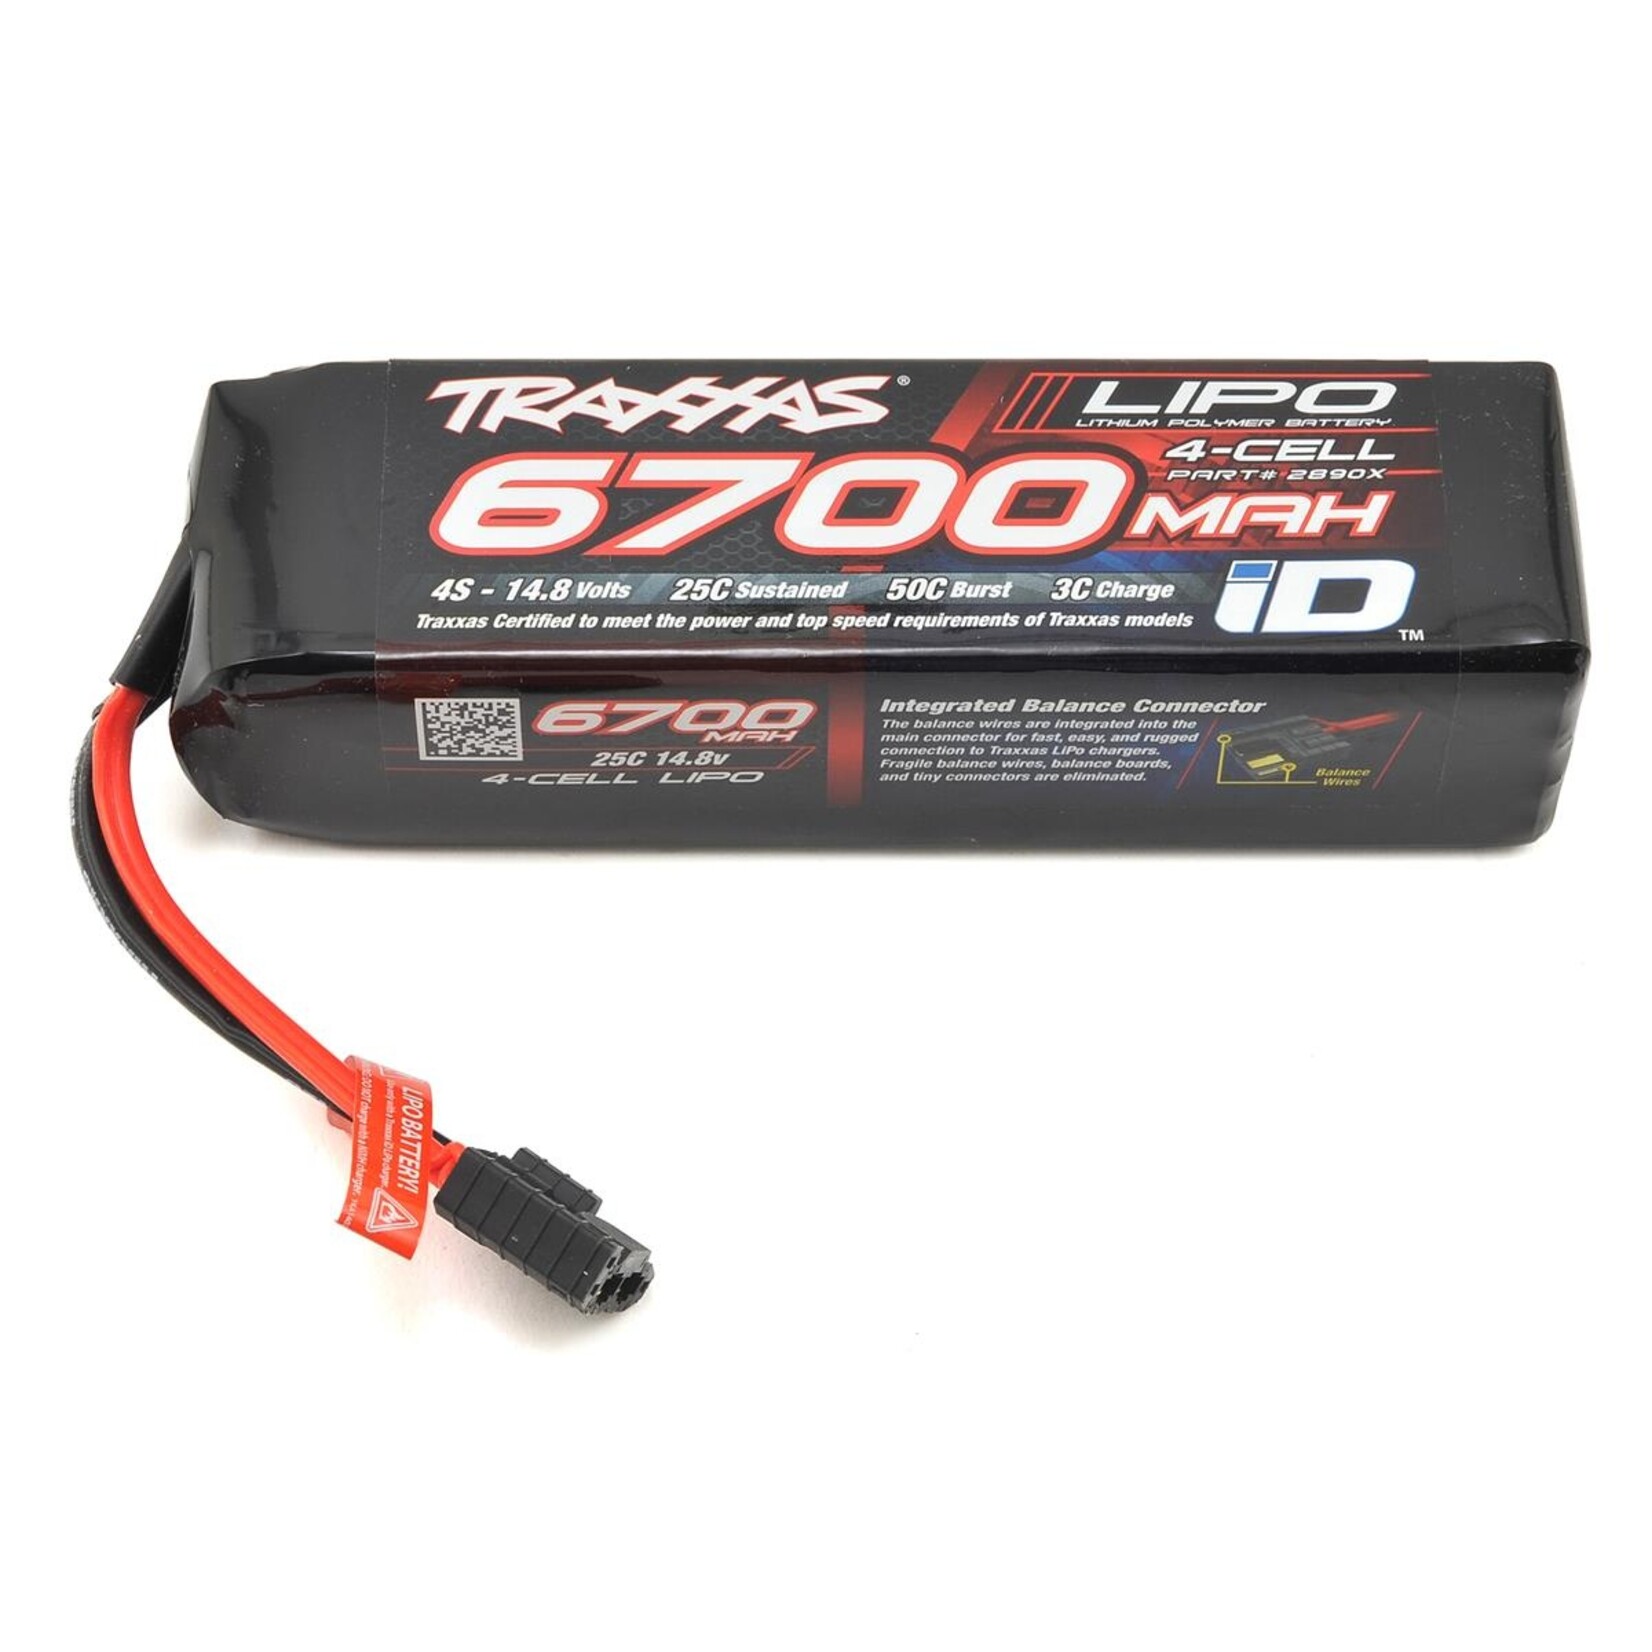 Traxxas 2998 4S LiPO 25C 6700MAH Battery/Charger Completer Kit